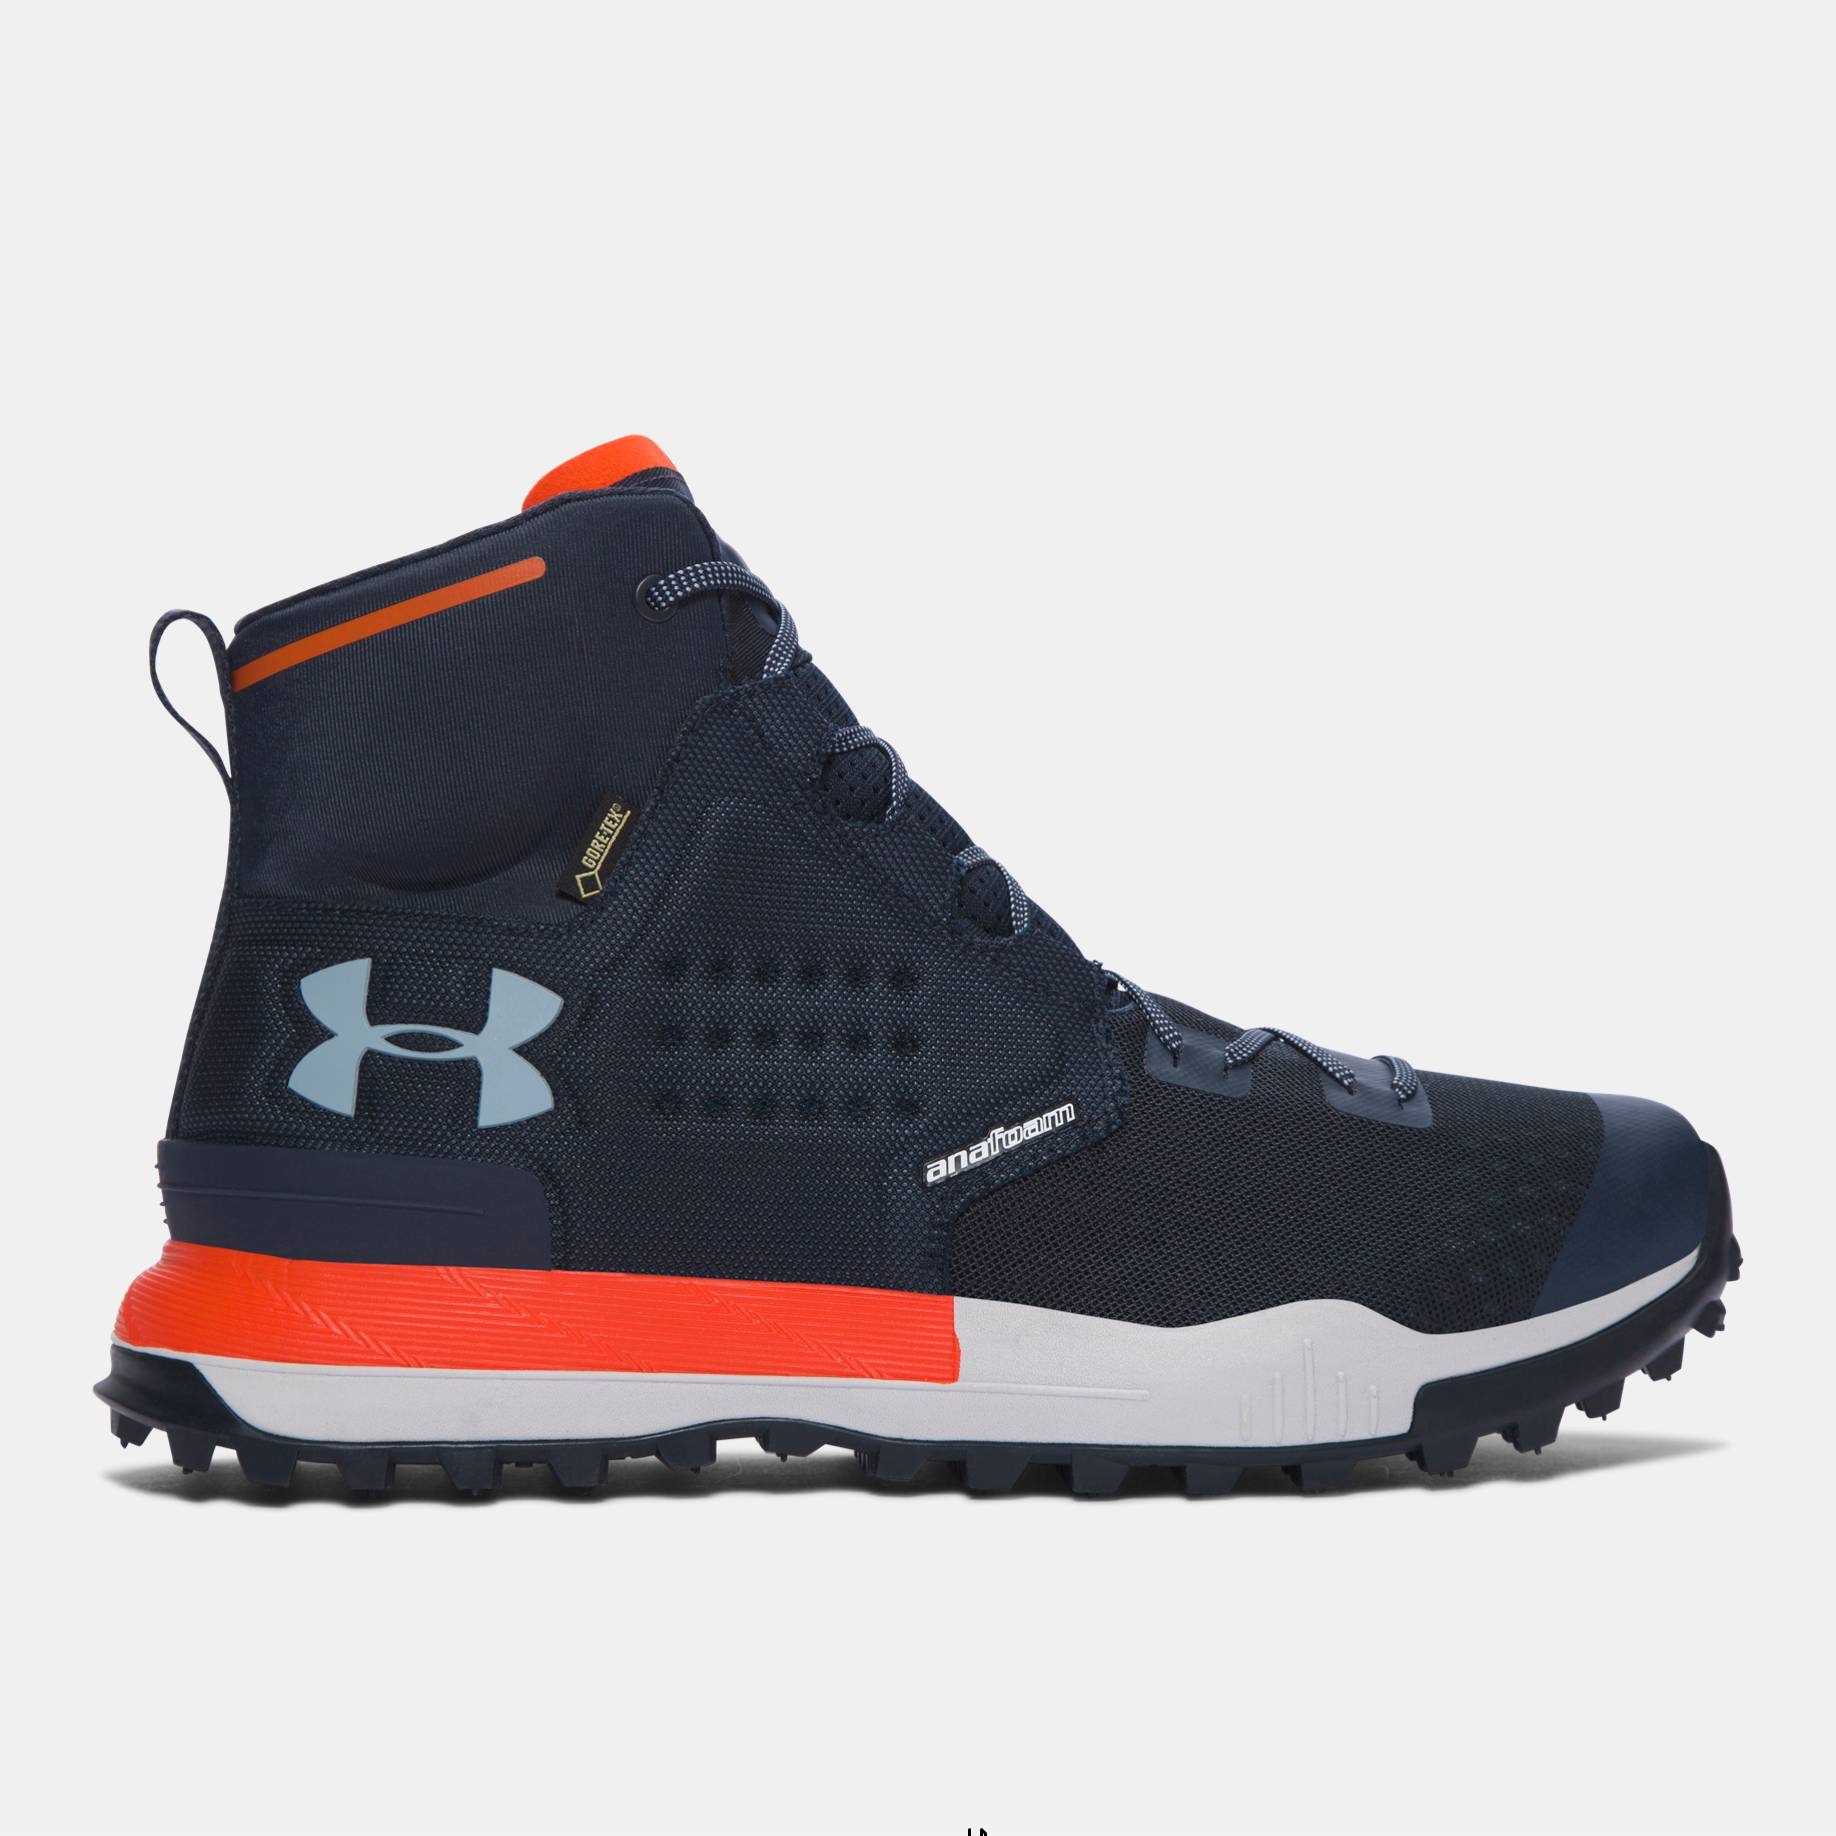 Under Armour Gore Tex Shoes | lupon.gov.ph